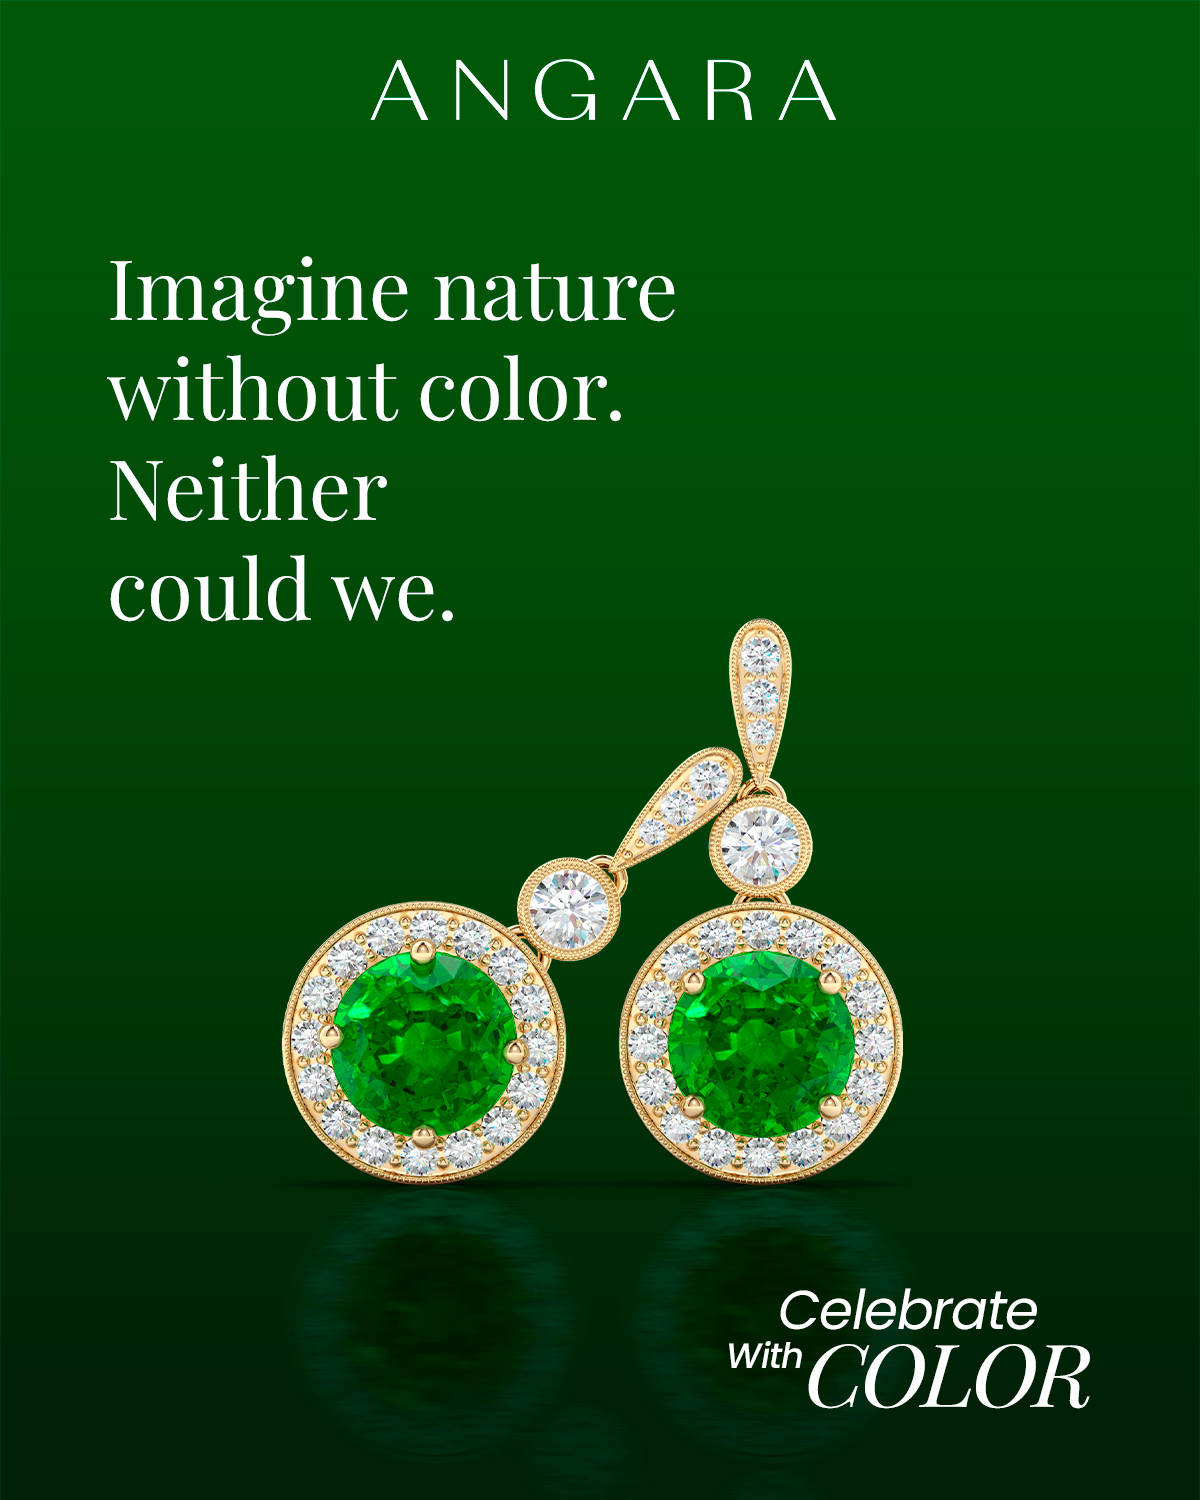 Angara’s ‘Celebrate With Color’ Campaign Highlights The Beauty Of Gemstones